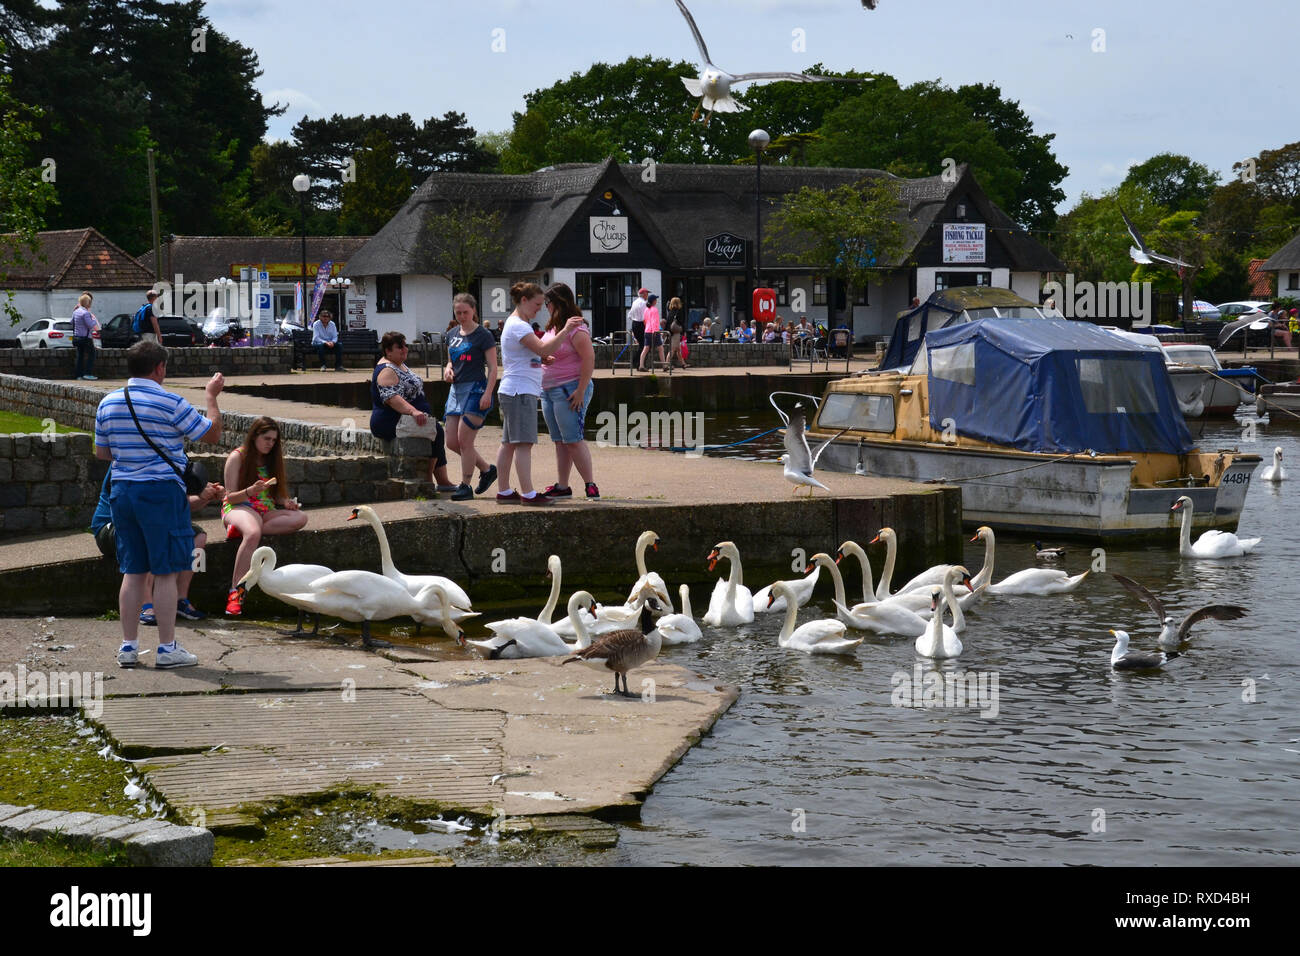 People feeding the swans and ducks outside The Quays Cafe on the bank of Oulton Broad, Suffolk, UK Stock Photo